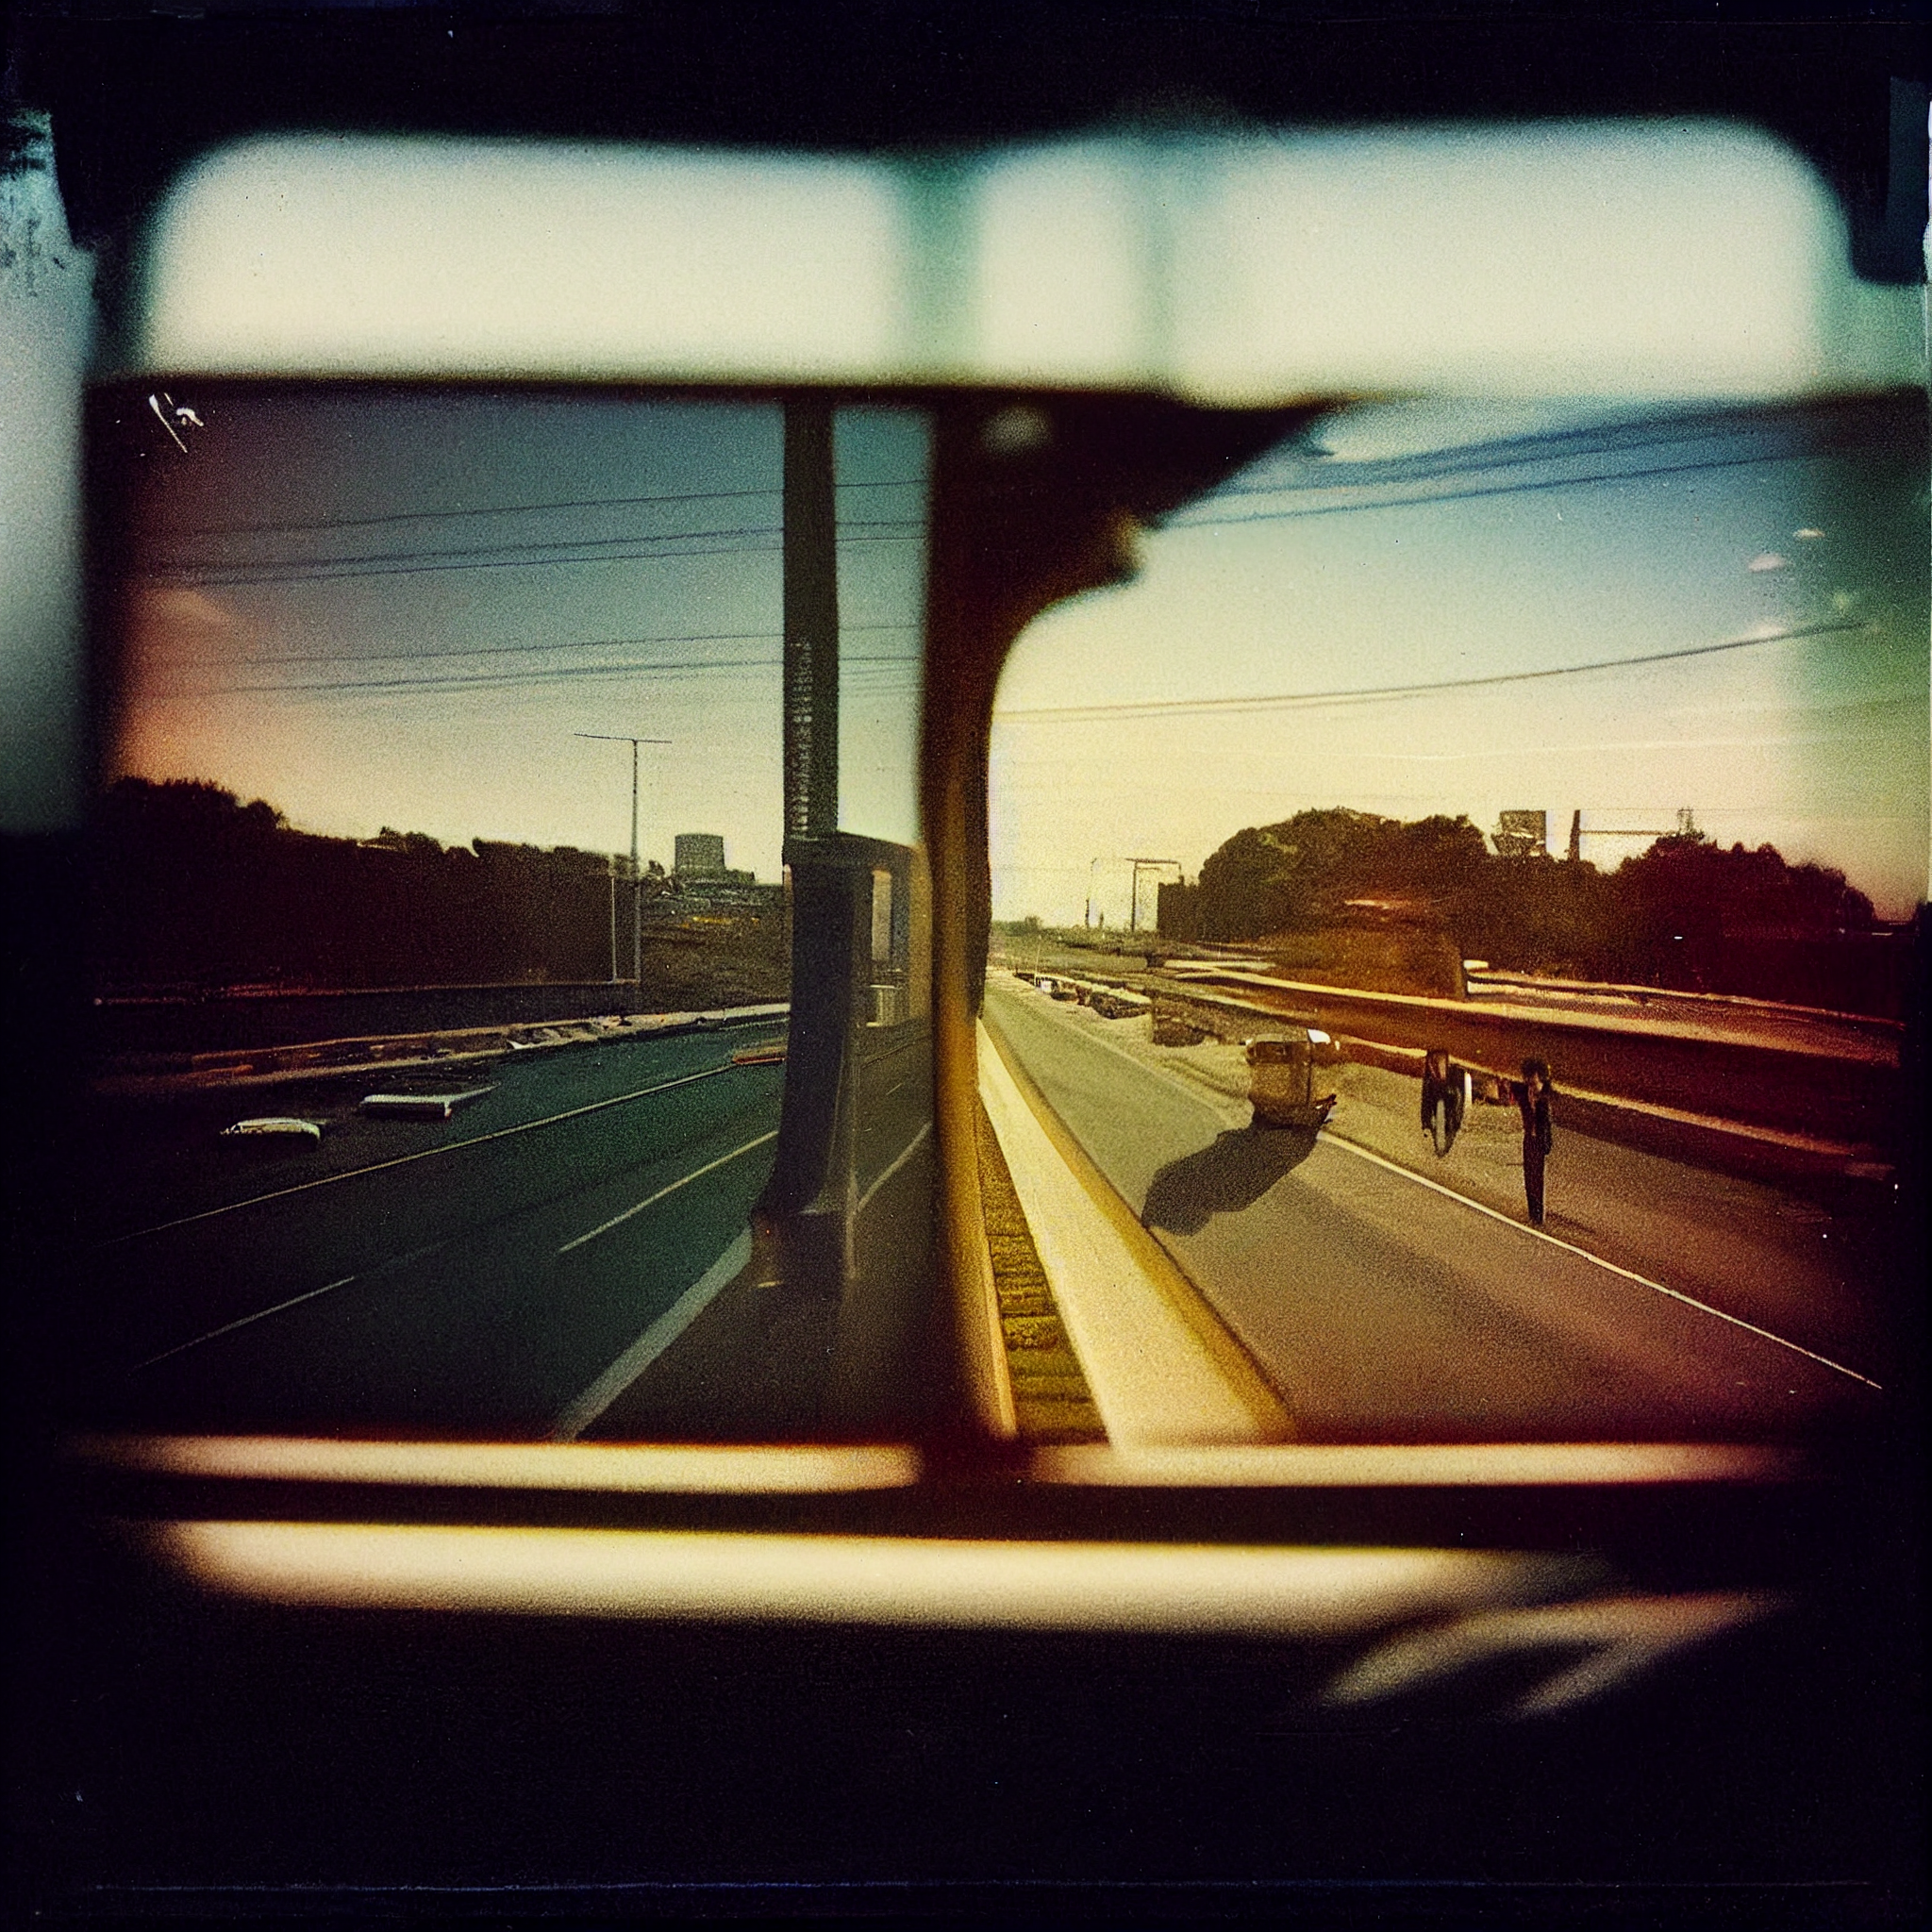 EricdeBroche_A_man_in_the_middle_of_the_motorway_with_cars_goin_75e3e255-74a3-4f39-9588-56b0c17493ed.png